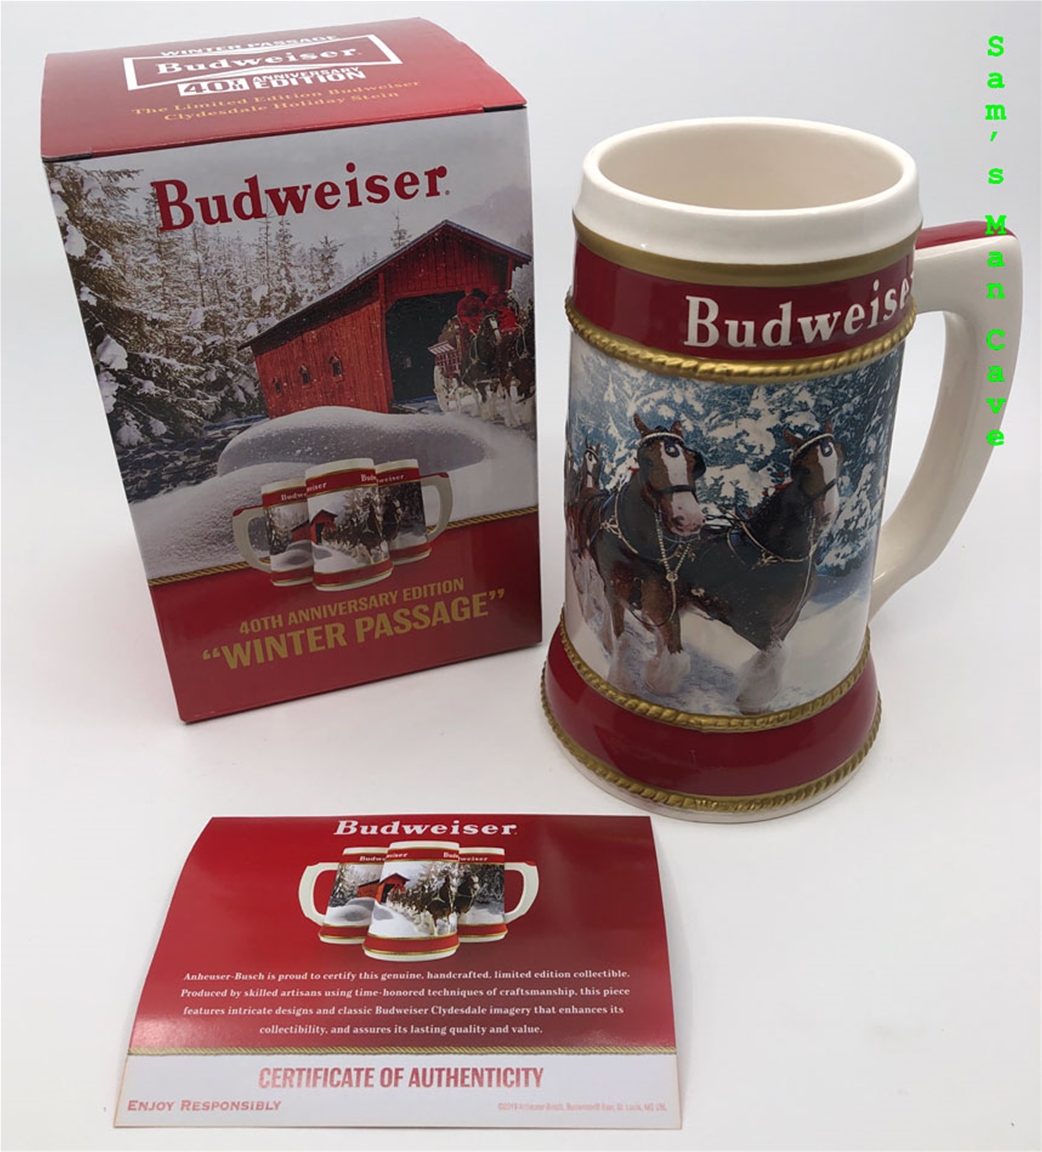 2019 Budweiser Holiday stein beer mug frm annual Christmas series WINTER PASSAGE 